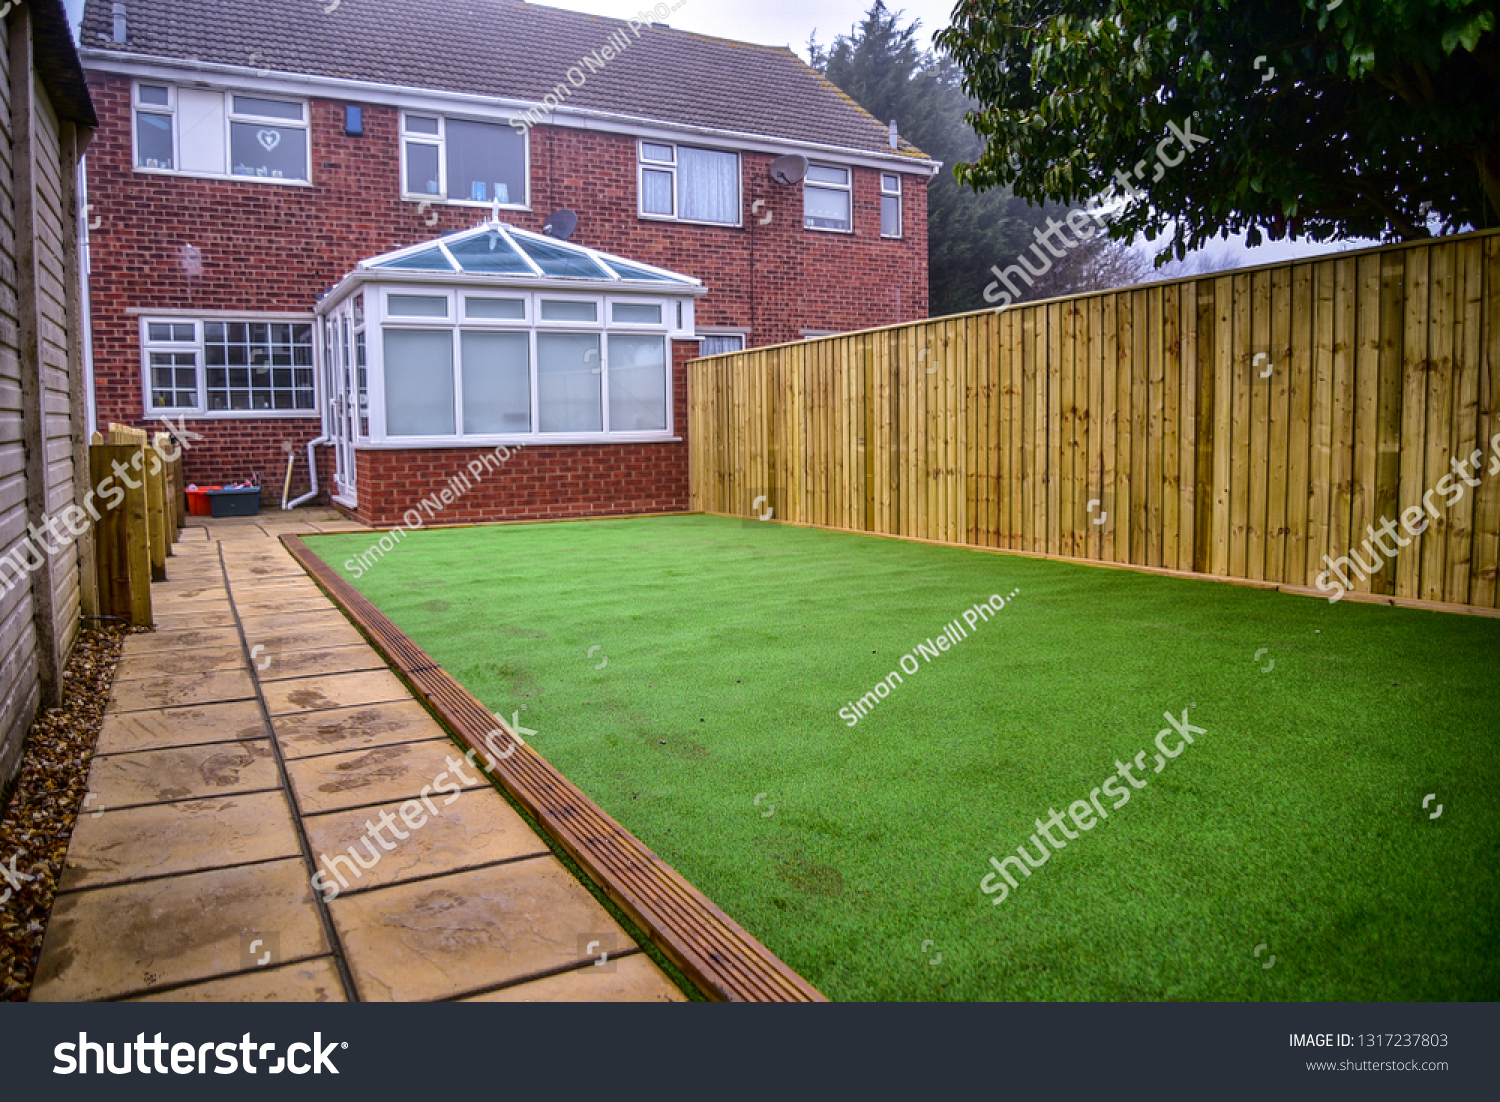 Garden Landscaping Outdoors Royalty Free Stock Image